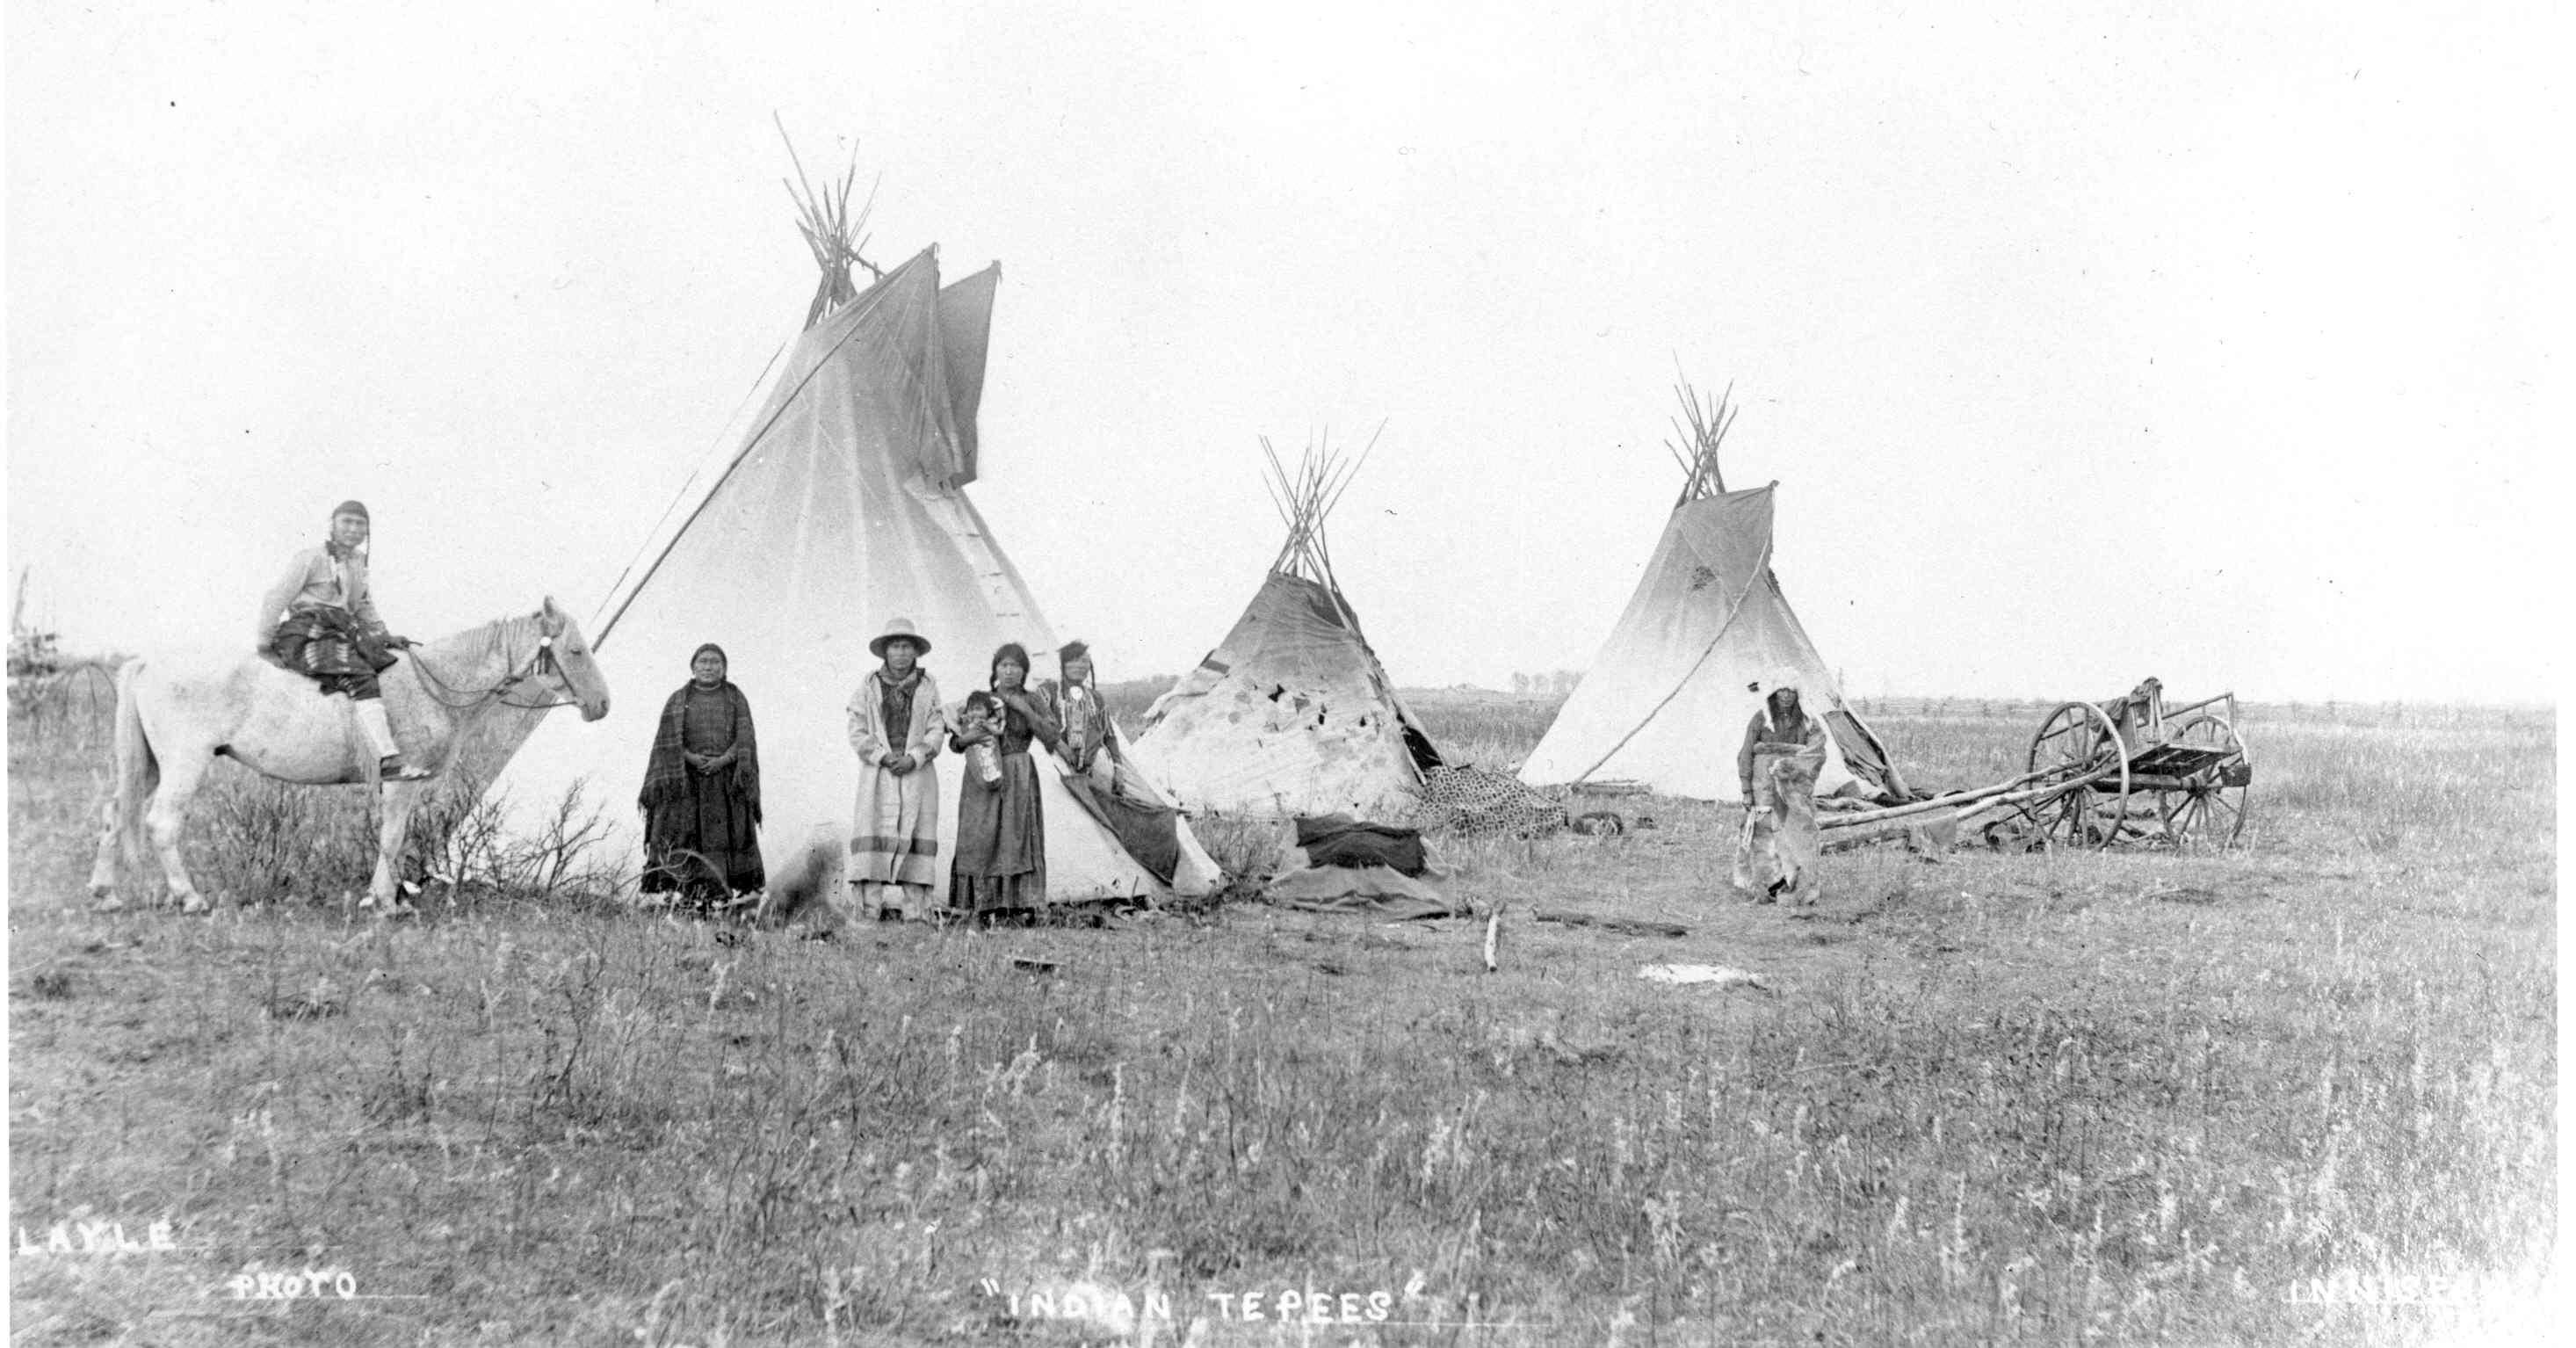 MARKING MILESTONES - Pictured here is a Cree First Nations encampment